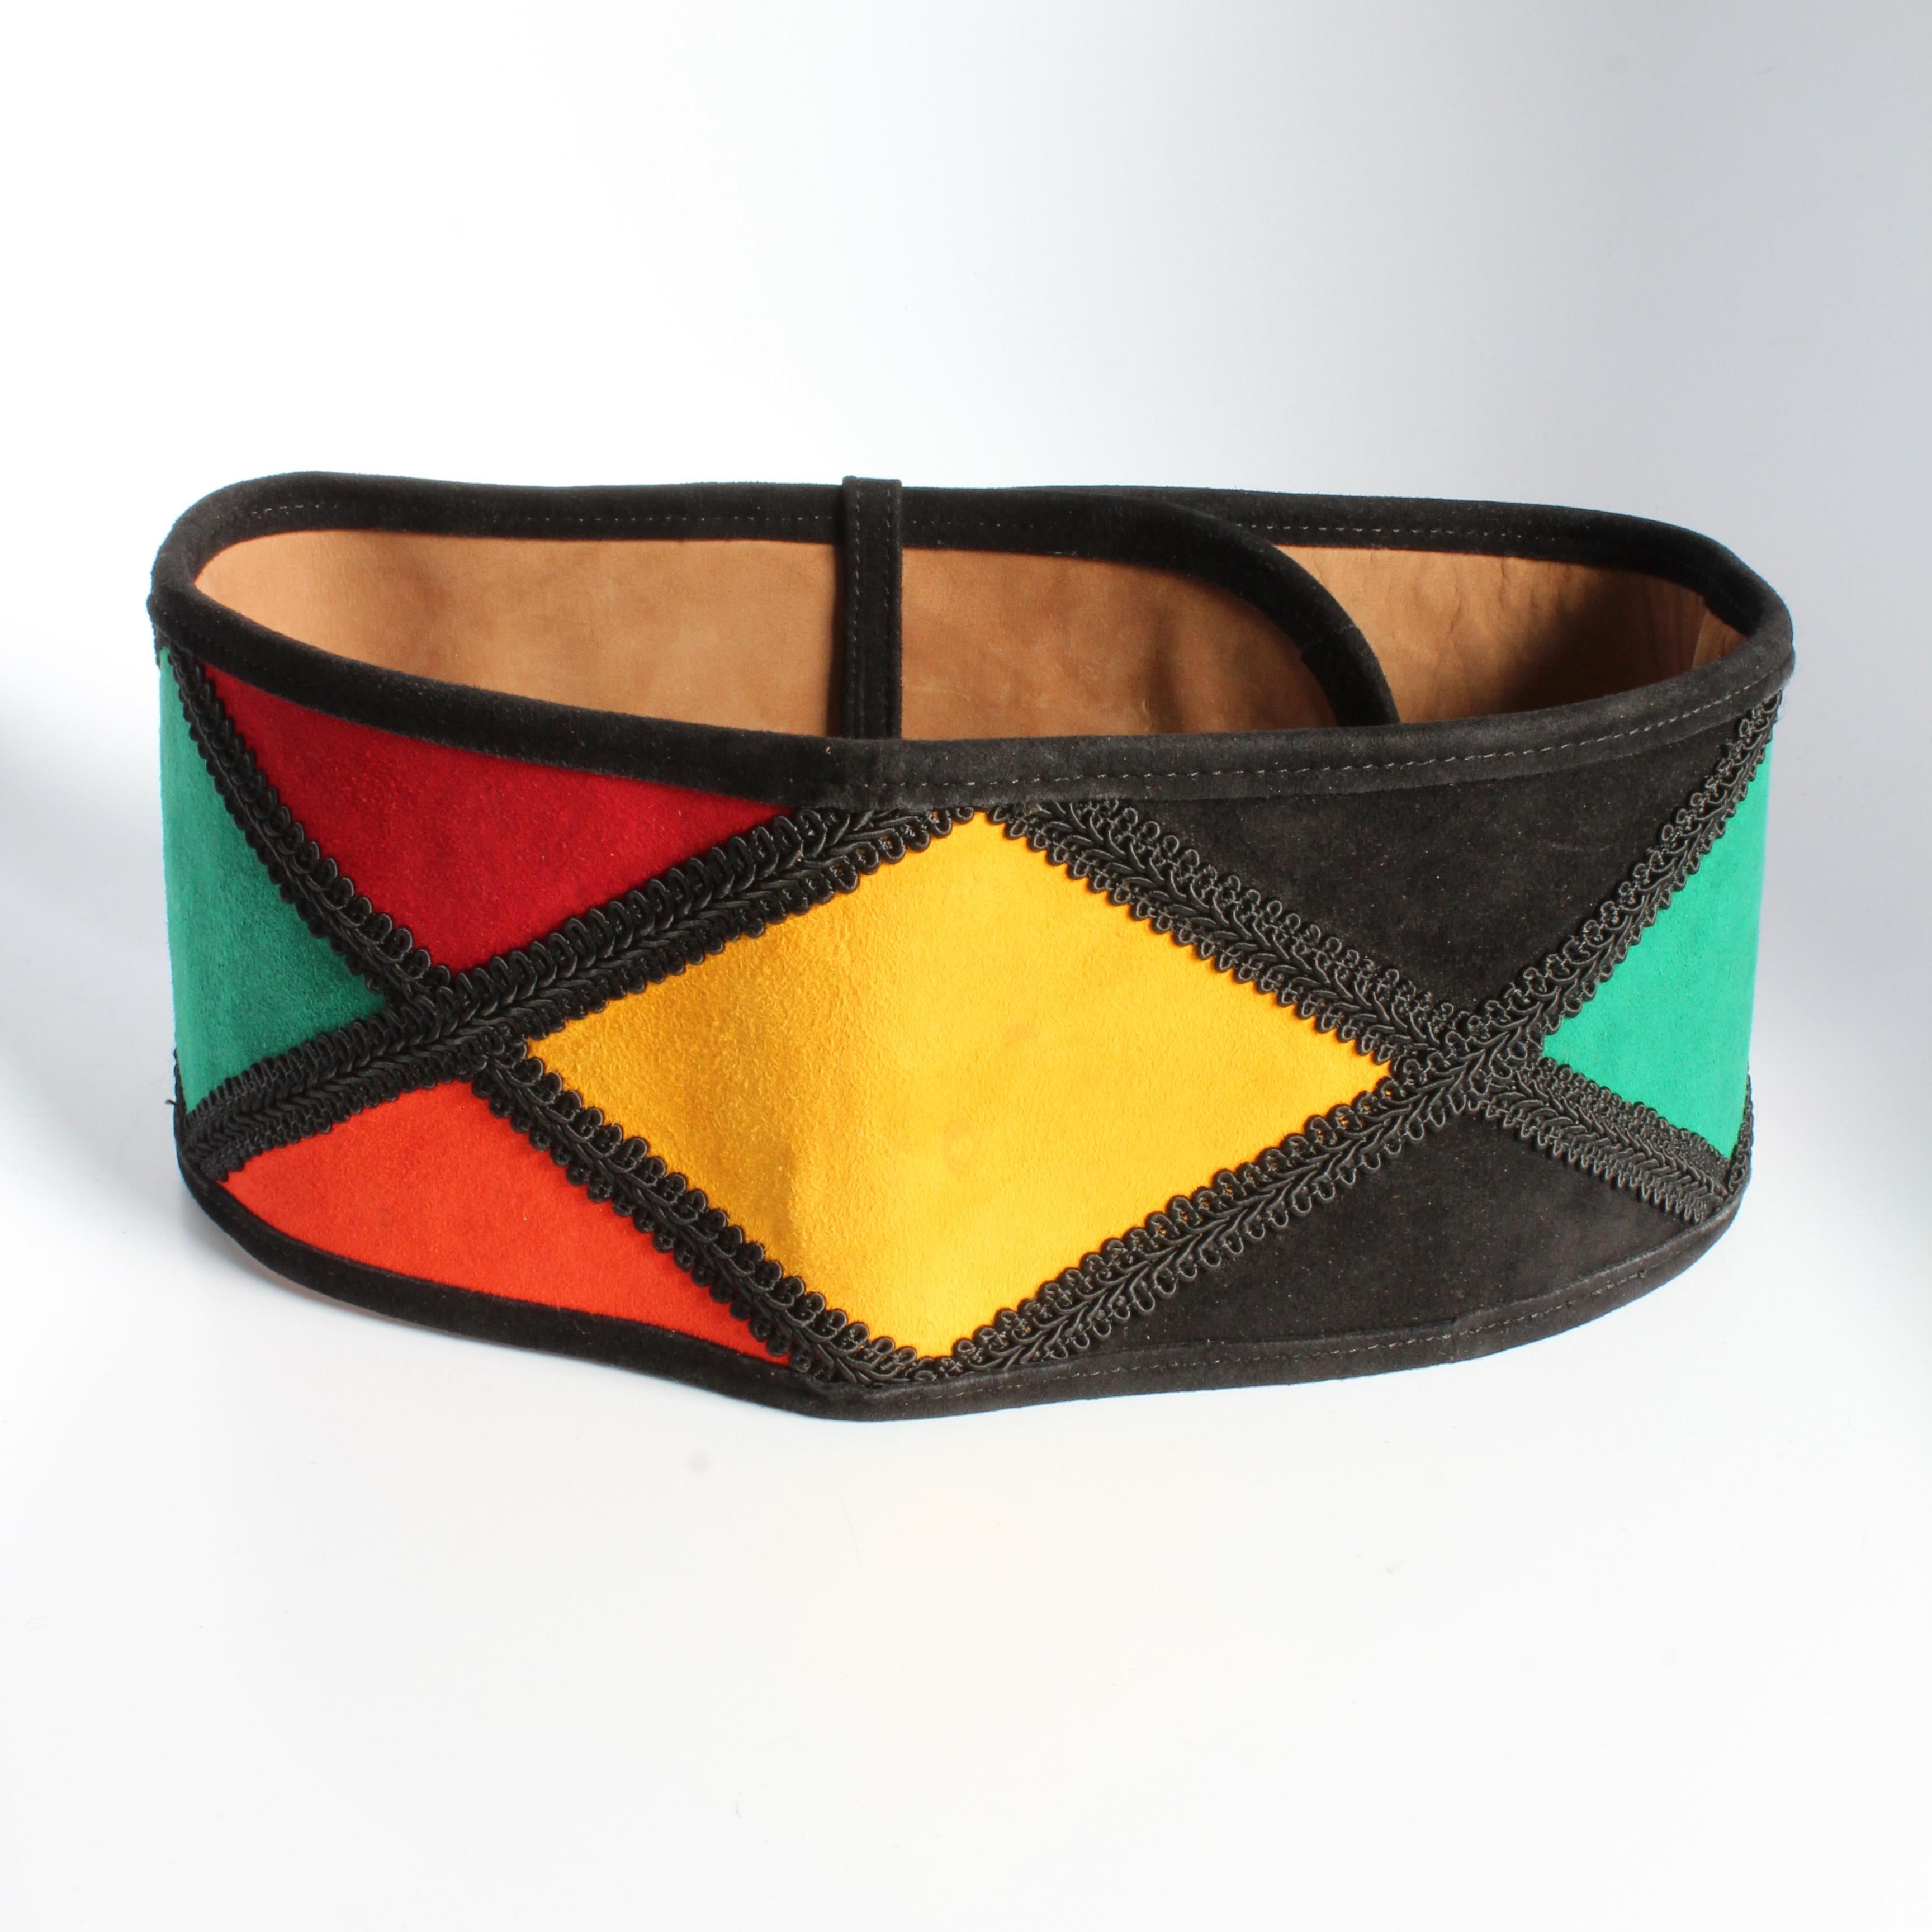 Moschino Belt Wide Harlequin Patch Multicolor Suede Leather Redwall Italy Rare For Sale 2